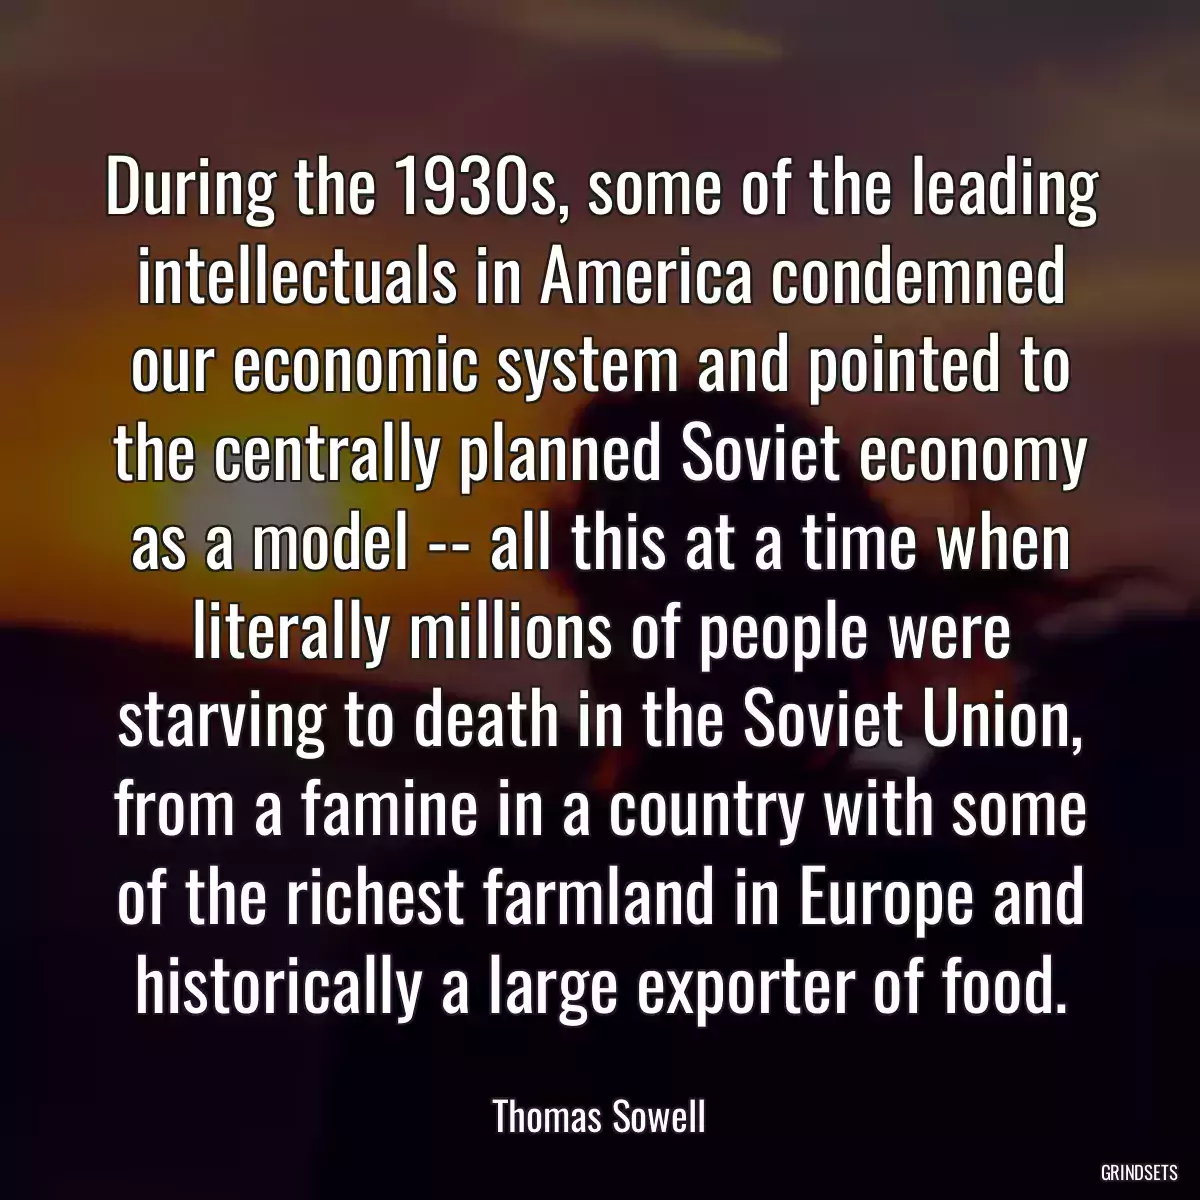 During the 1930s, some of the leading intellectuals in America condemned our economic system and pointed to the centrally planned Soviet economy as a model -- all this at a time when literally millions of people were starving to death in the Soviet Union, from a famine in a country with some of the richest farmland in Europe and historically a large exporter of food.